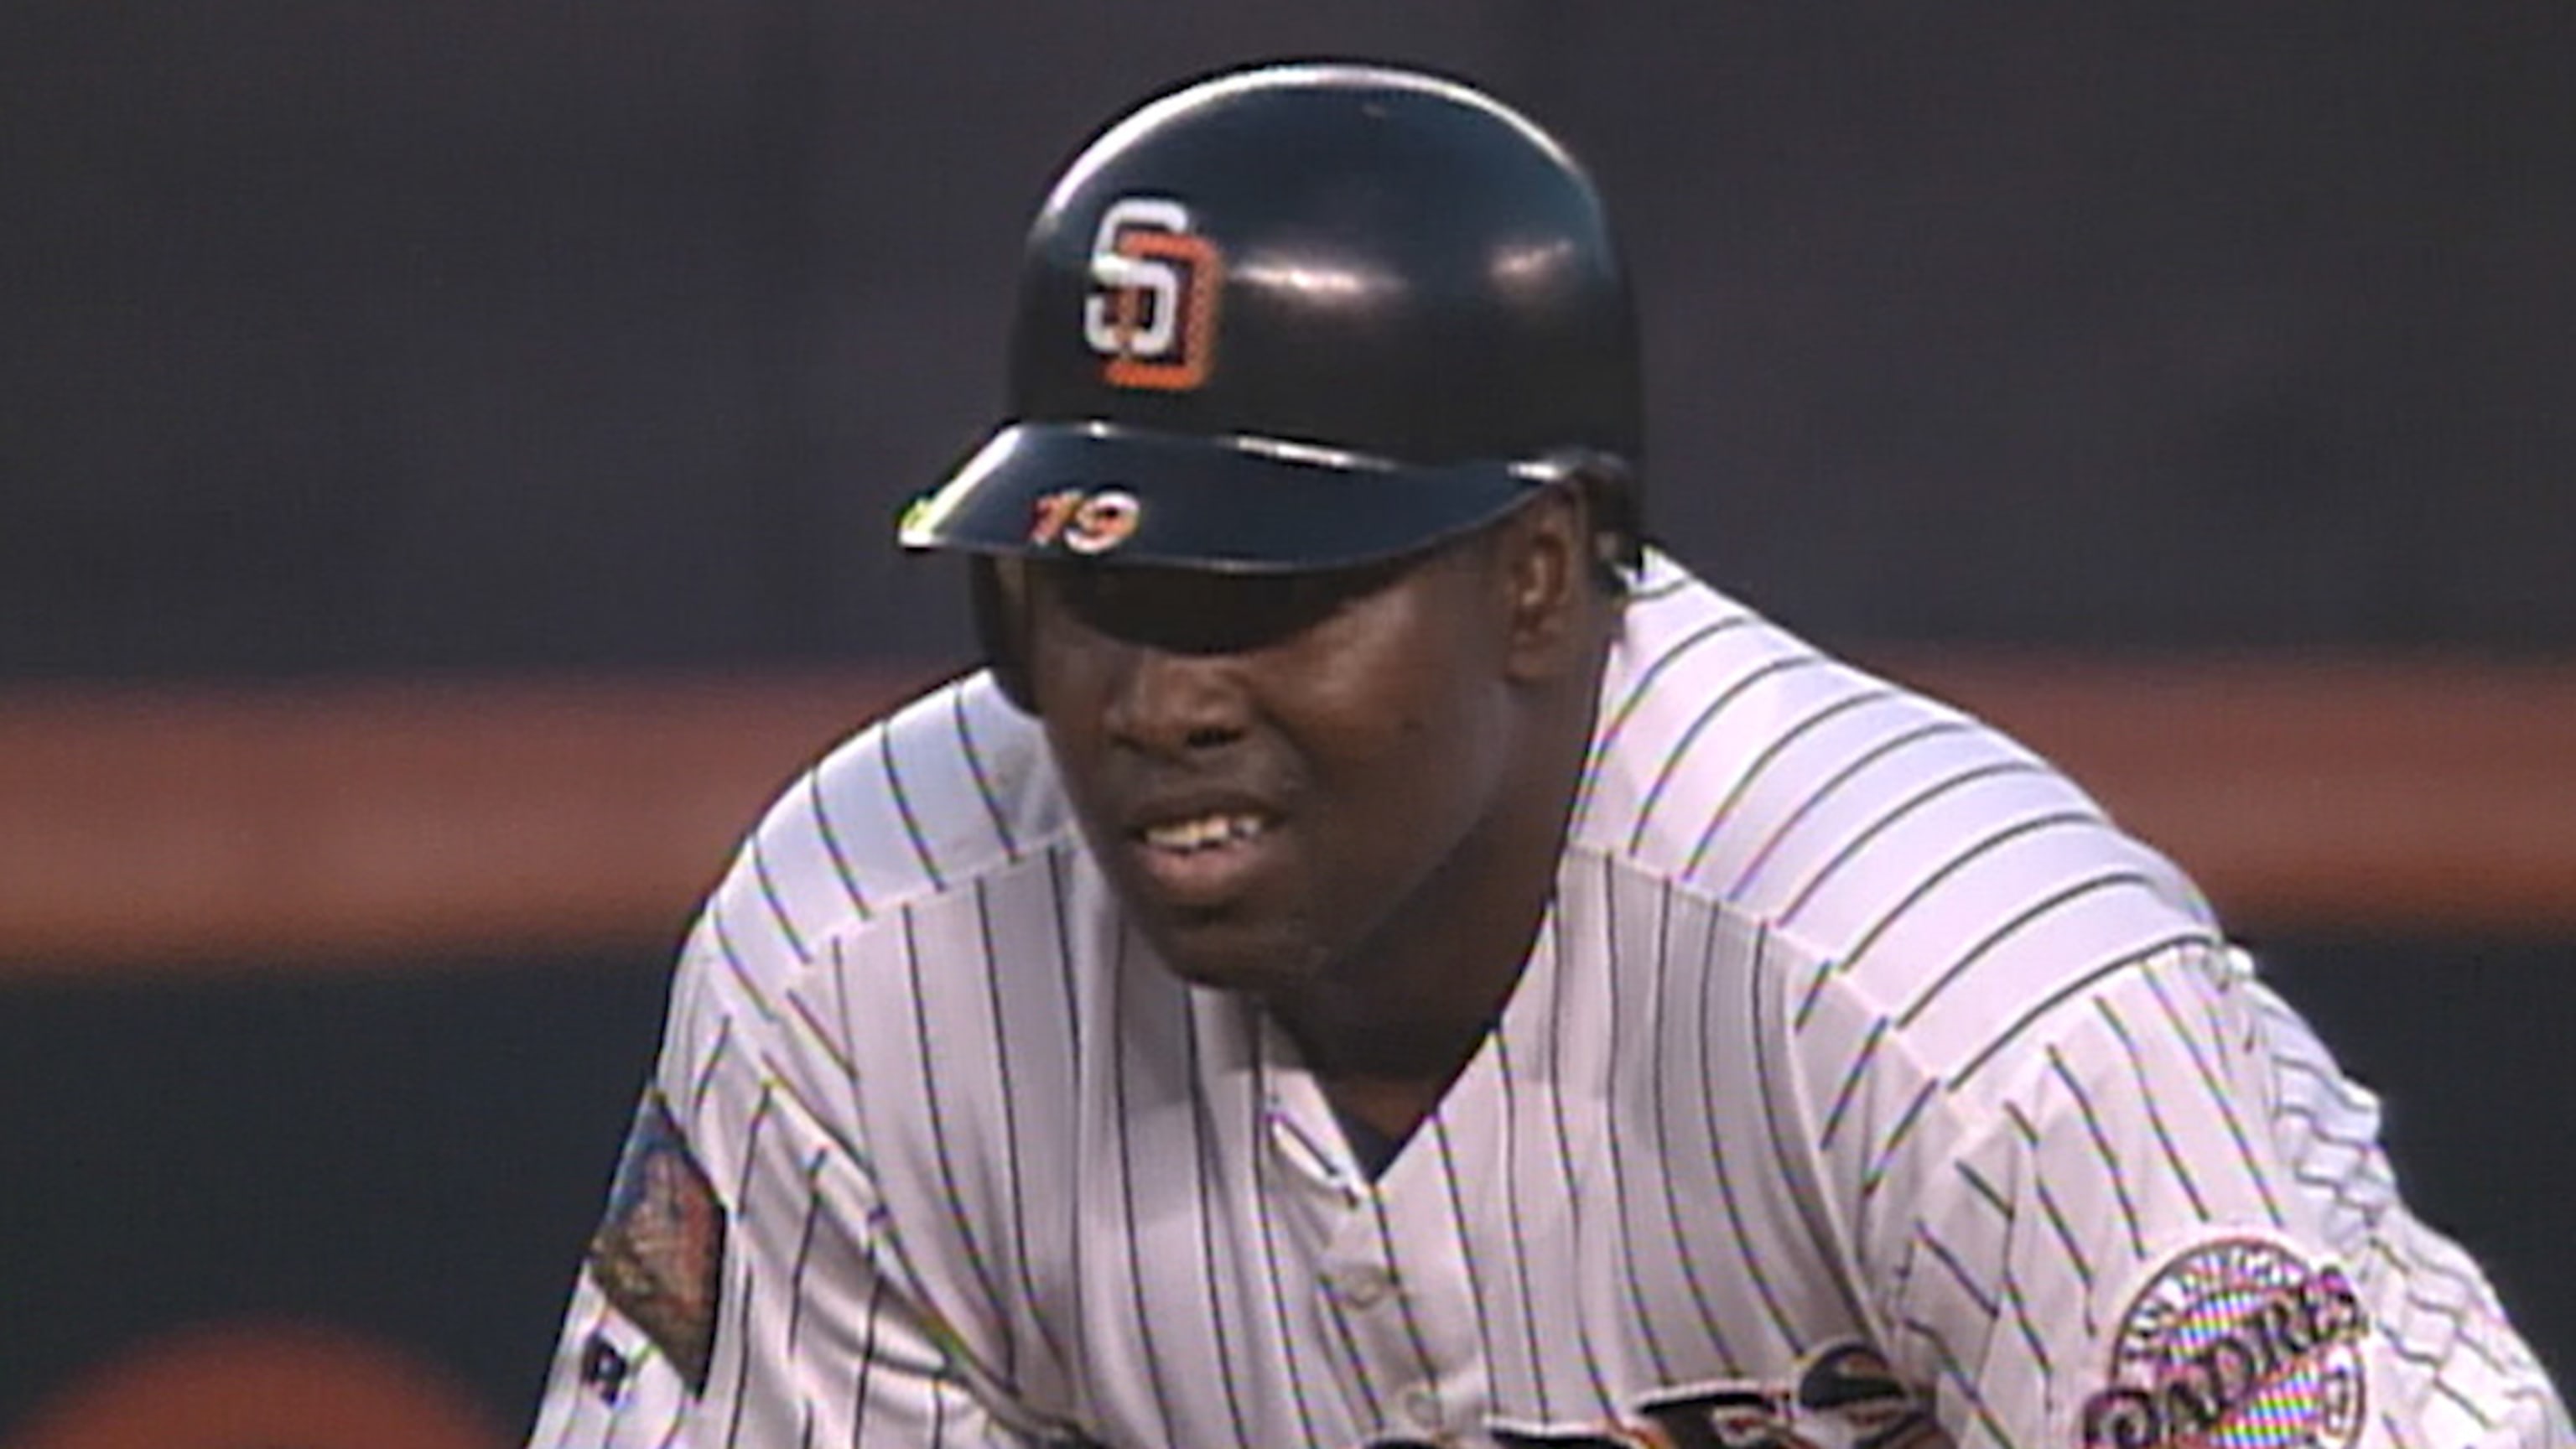 Two MLB legends Tony Gwynn should've ranked higher than in ESPN's top 100  players of all time list - Gaslamp Ball